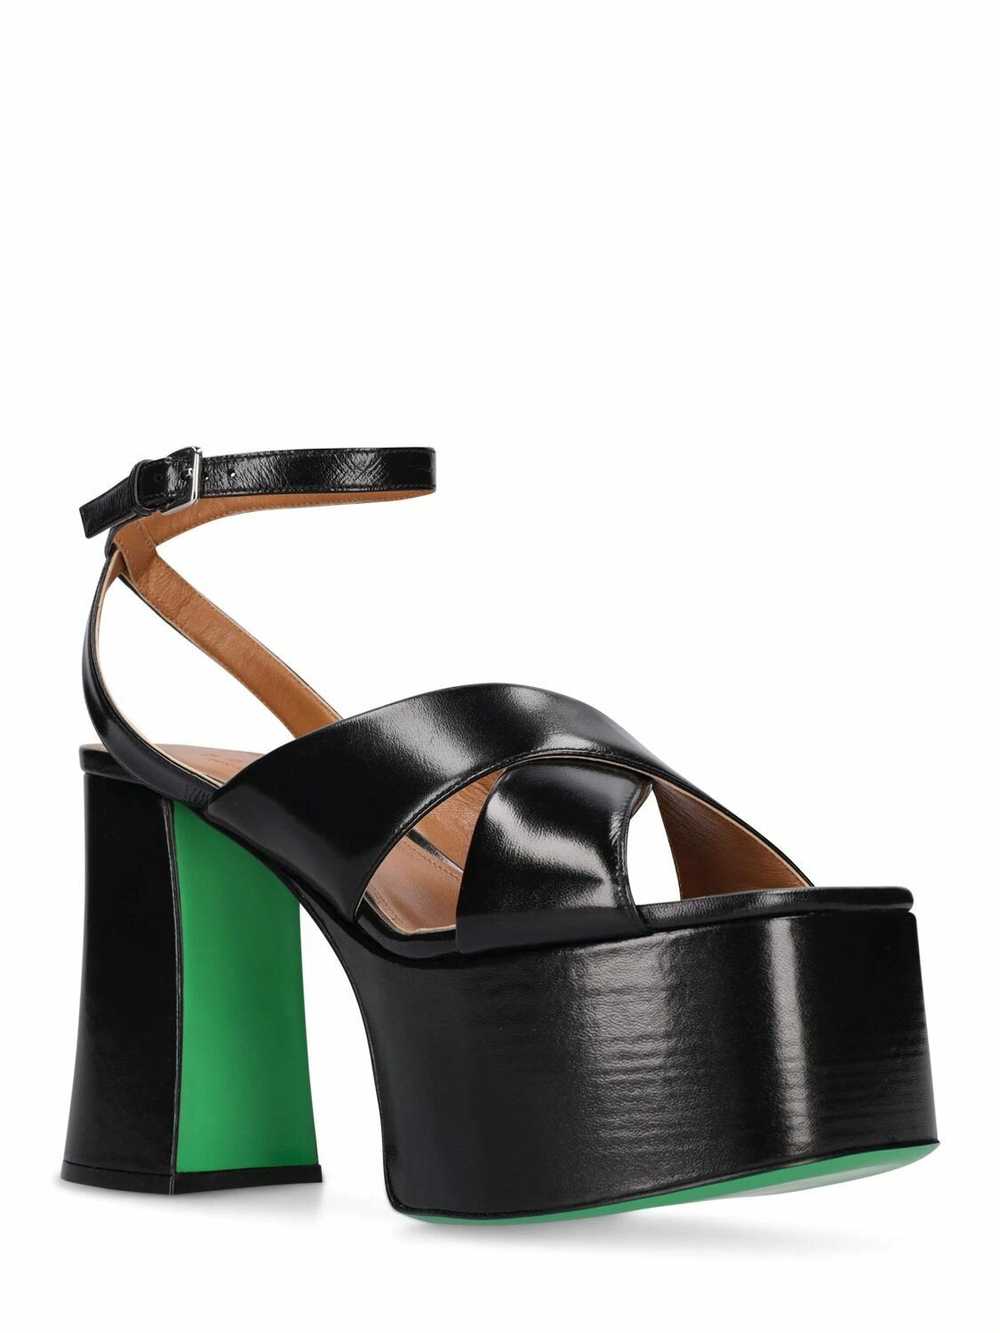 Marni o1w1db10524 Patent Leather Sandals in Black - image 2